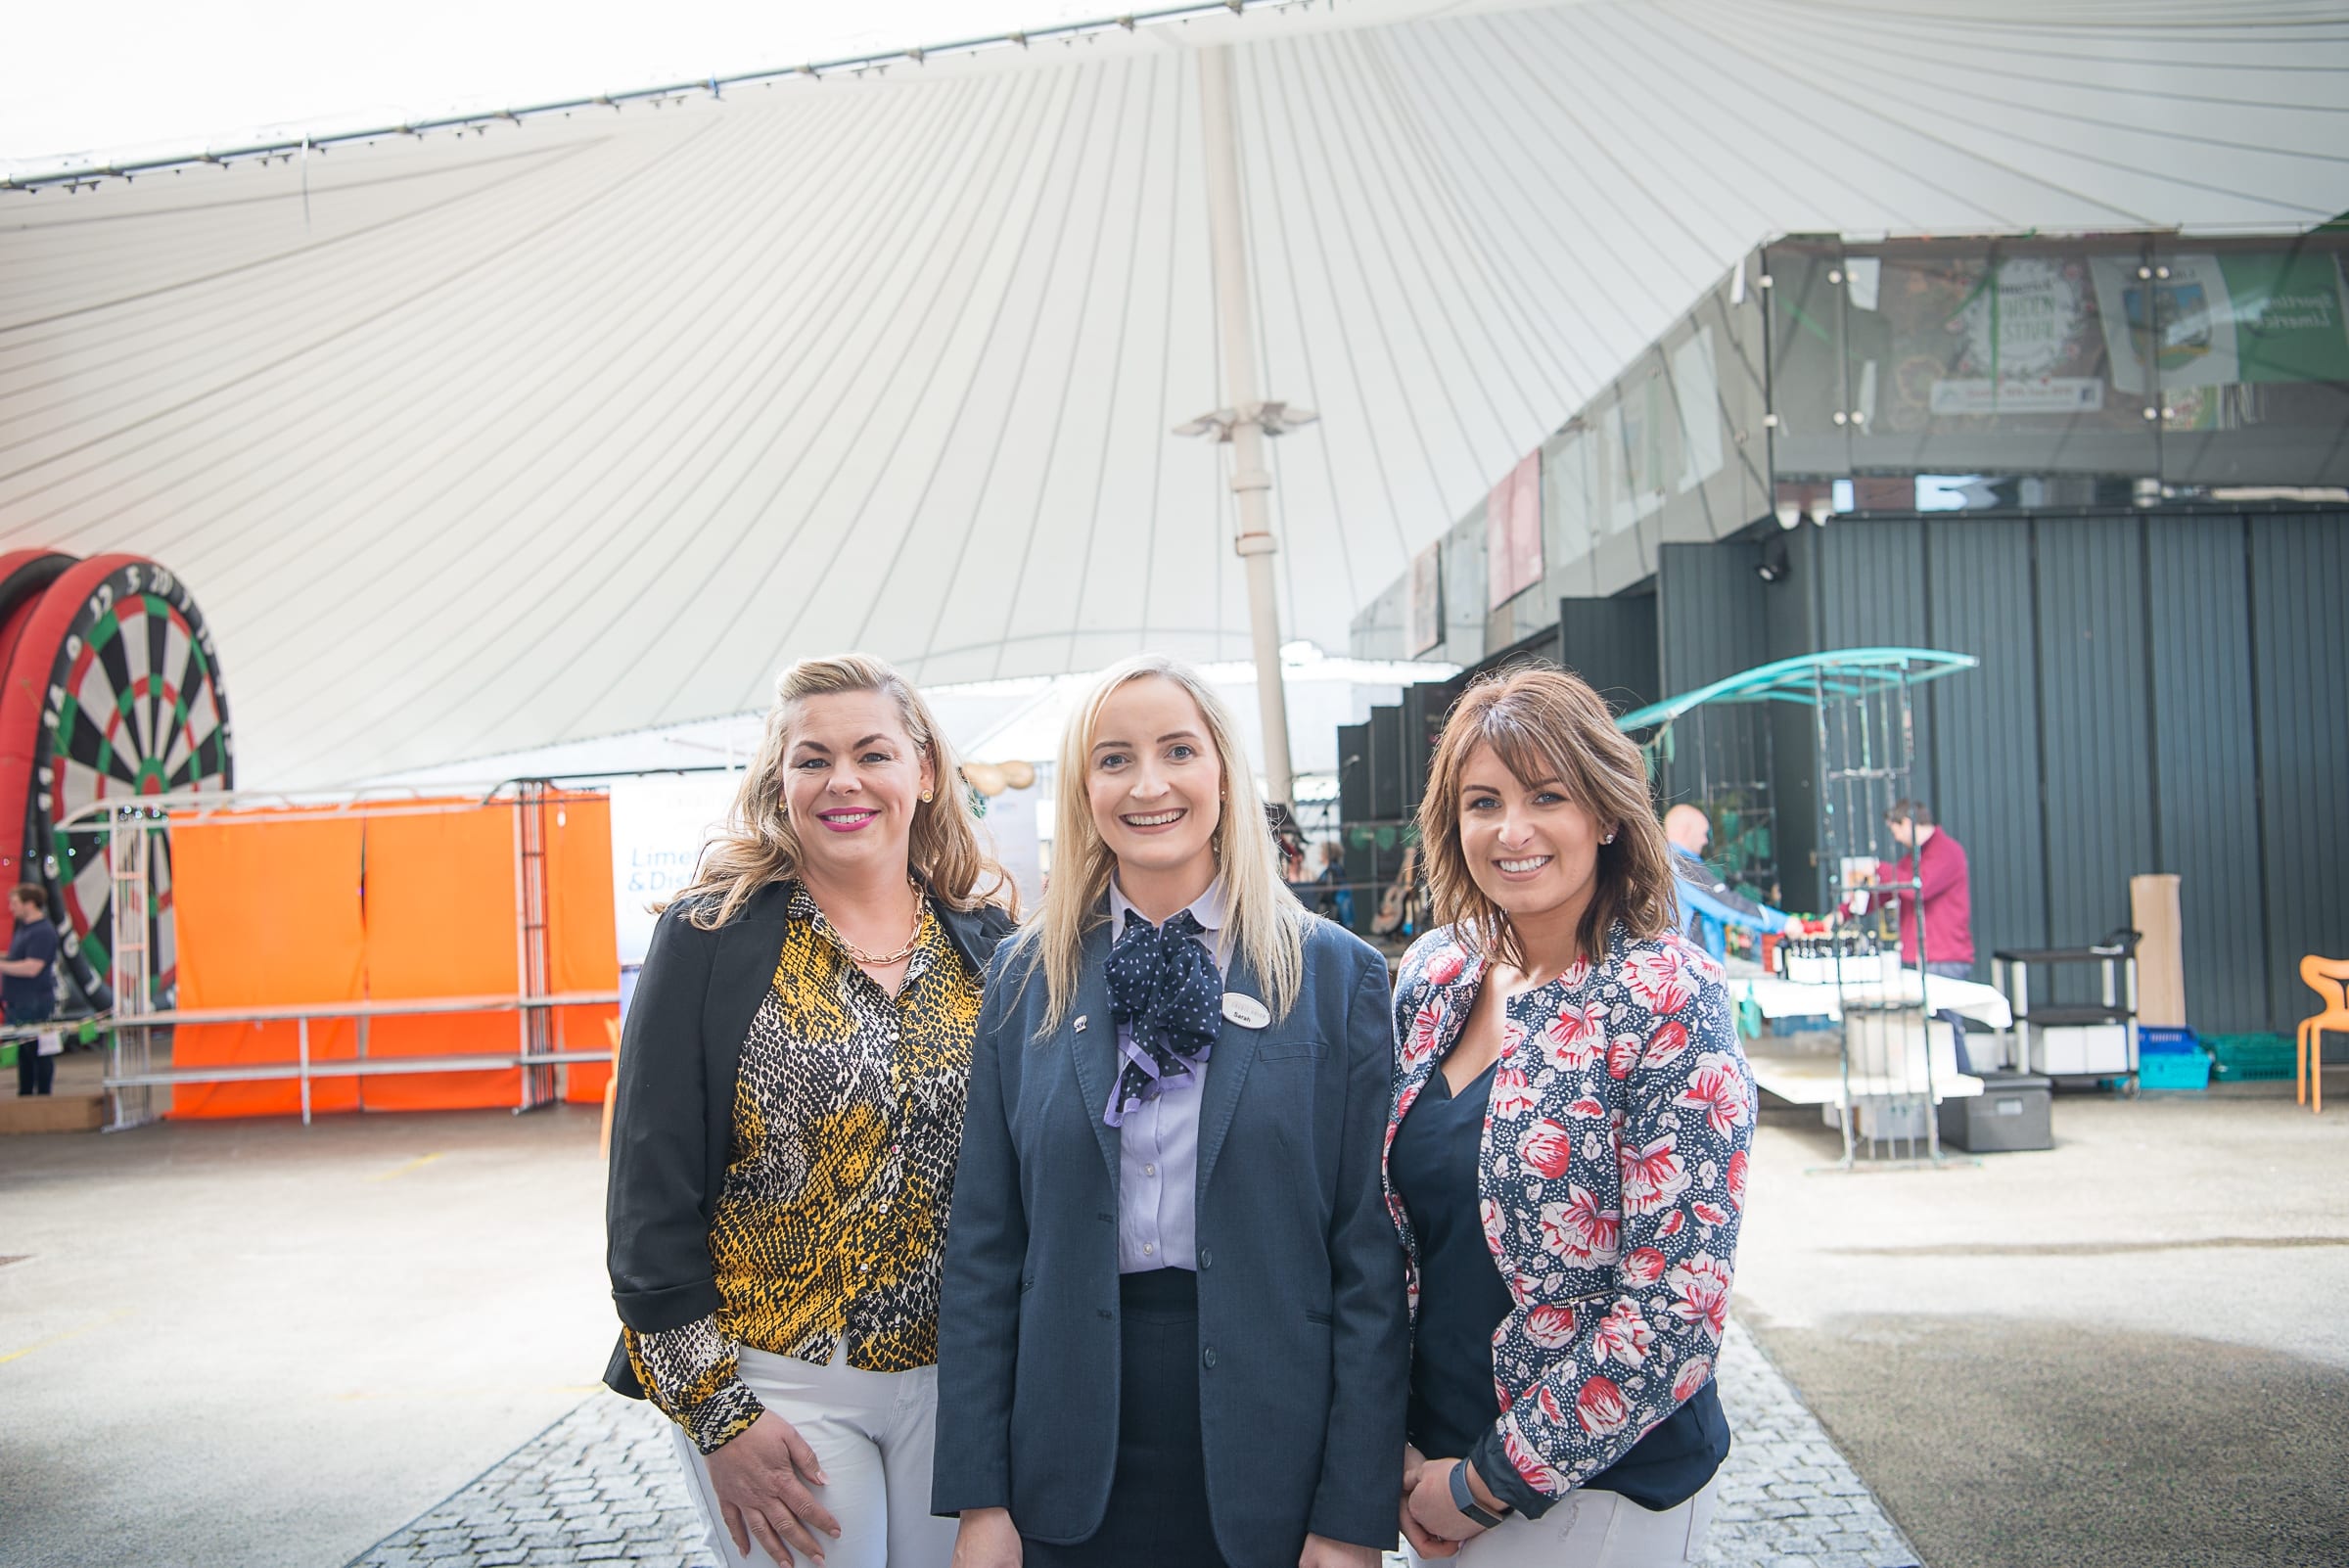 From Left to Right:  Regional Leaders BBQ which took place on the 6th June in the Limerick Milk Market:    Ursula MacKenzie - Employability, Sarah Barry  - Limerick and  District Credit Union, Michelle O’Connor - Employability,
Photo by Morning Star Photography